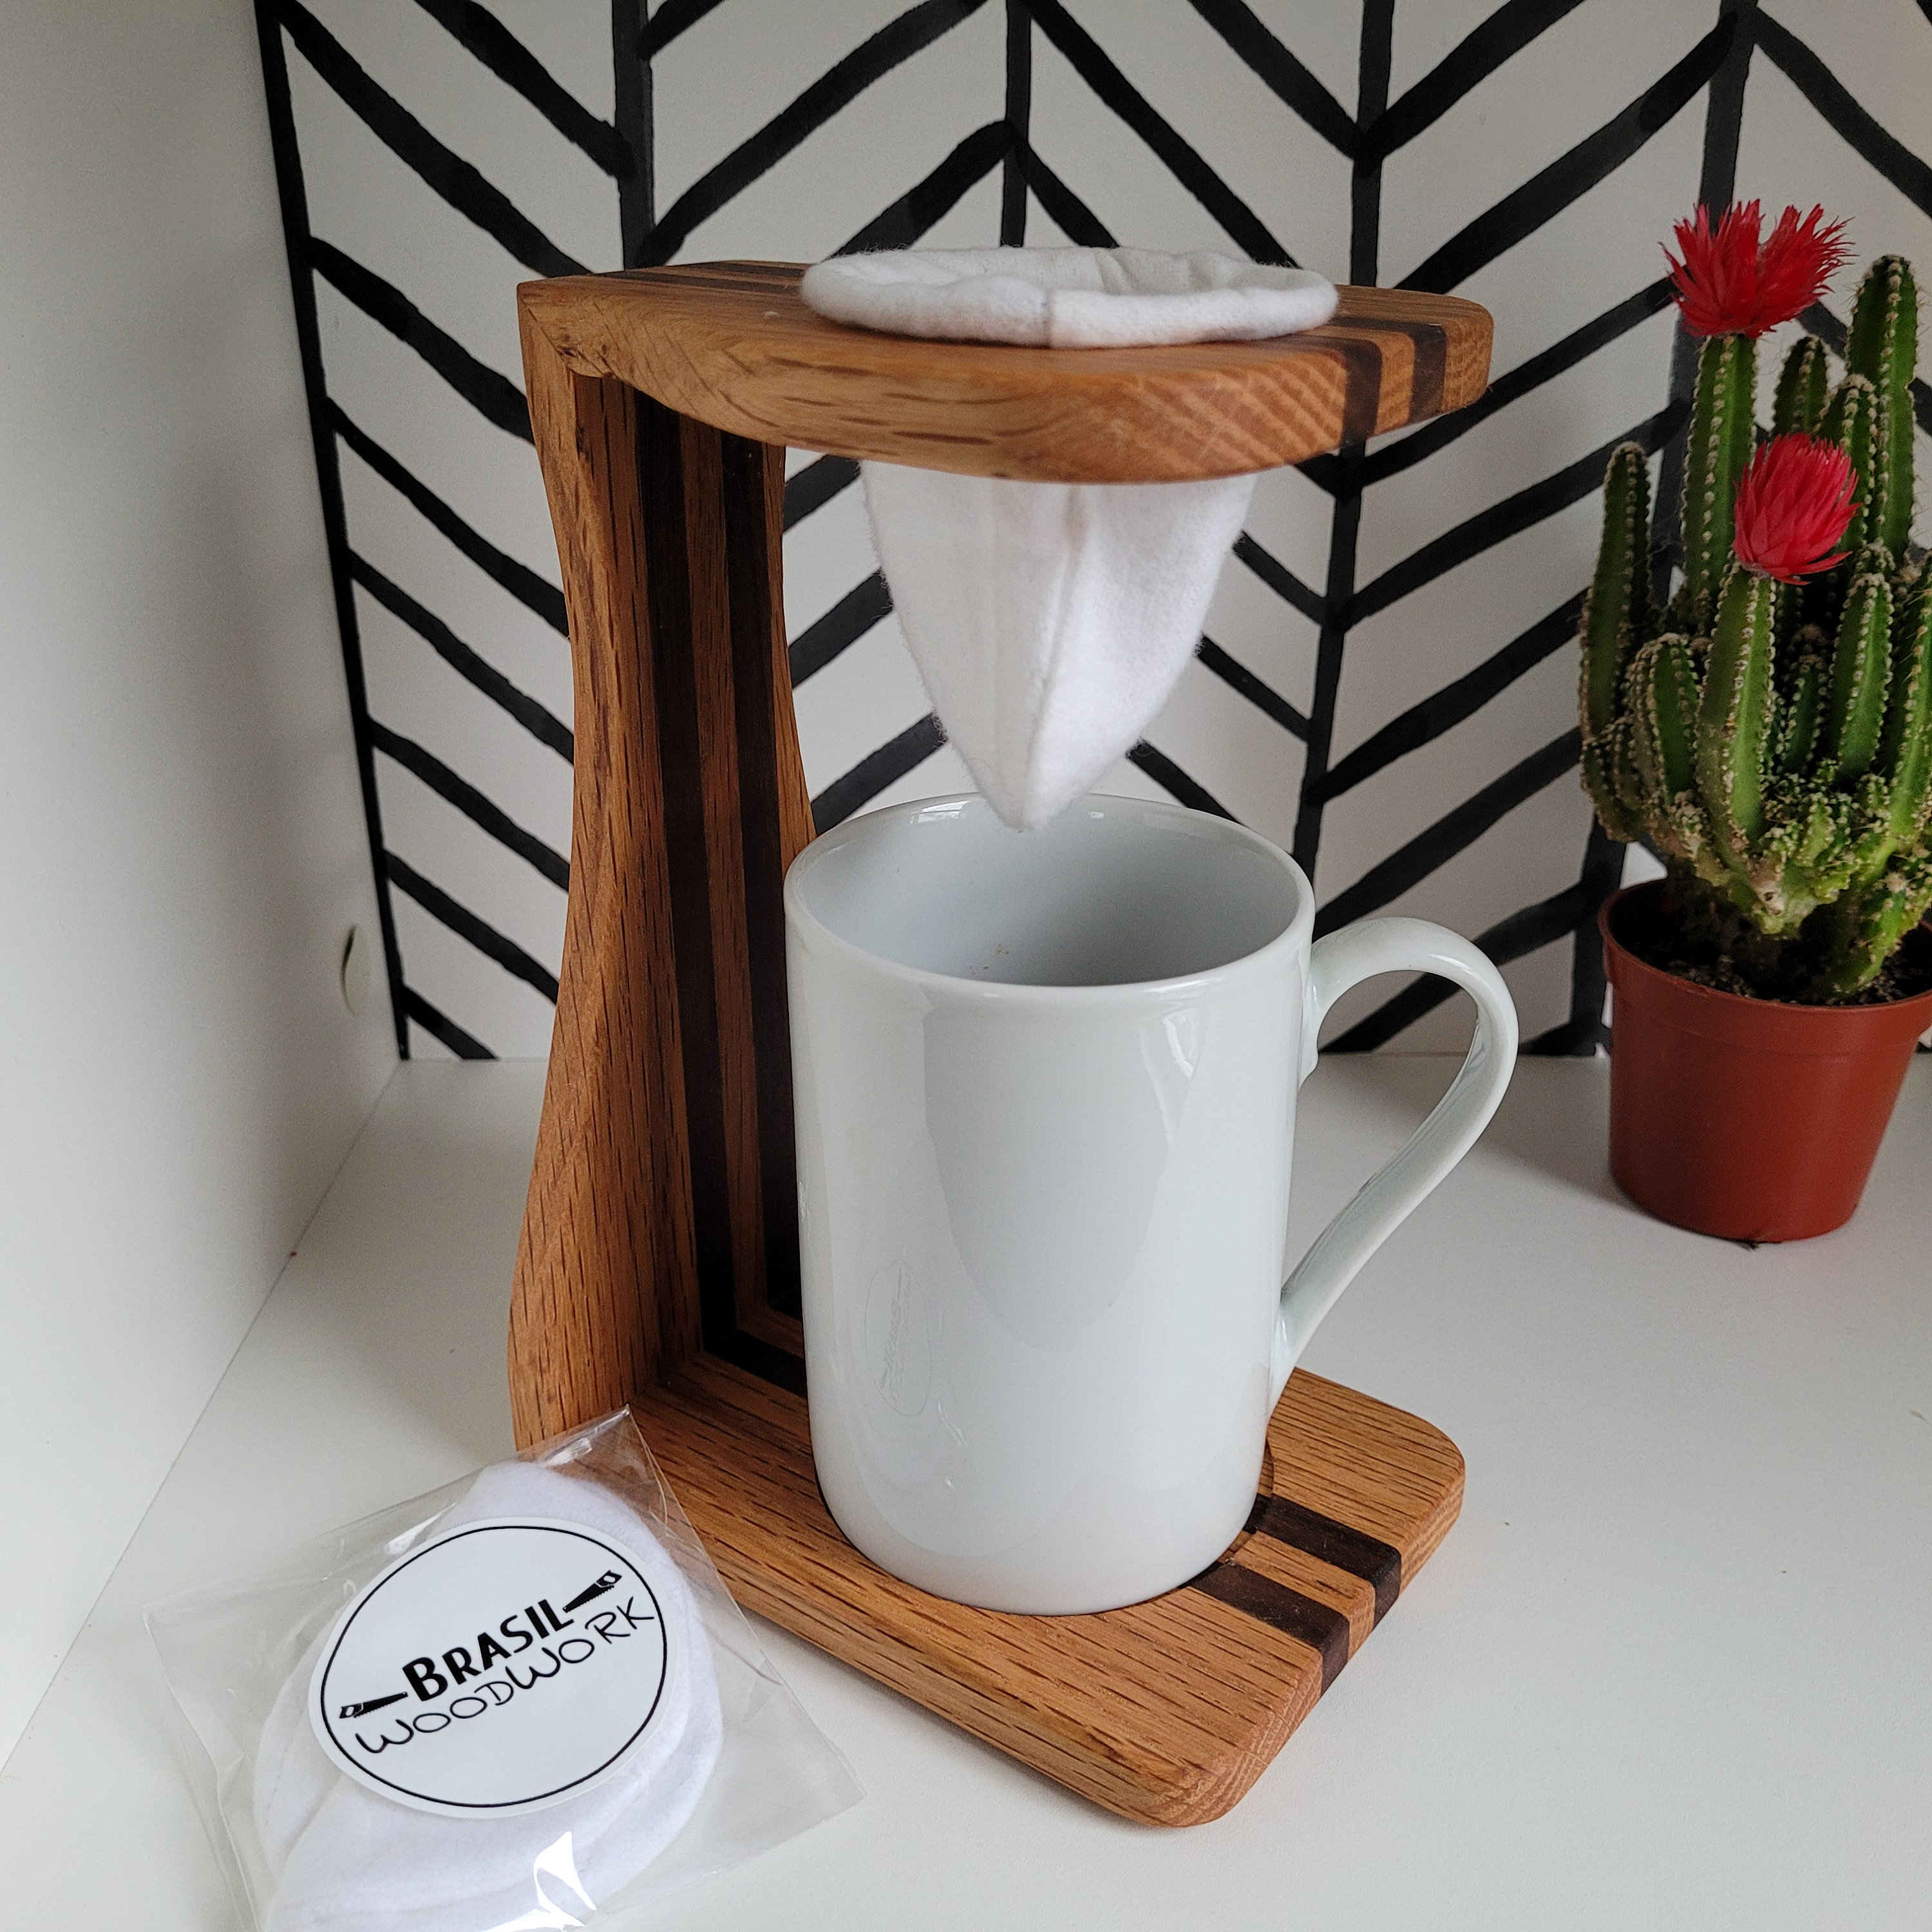 L'ÉPICÉA Pour Over Coffee Maker Set, Pour Over Coffee Maker with Stand, Adjustable Stainless Steel Stand, Wooden Base, Paper Filters, Cone Glass